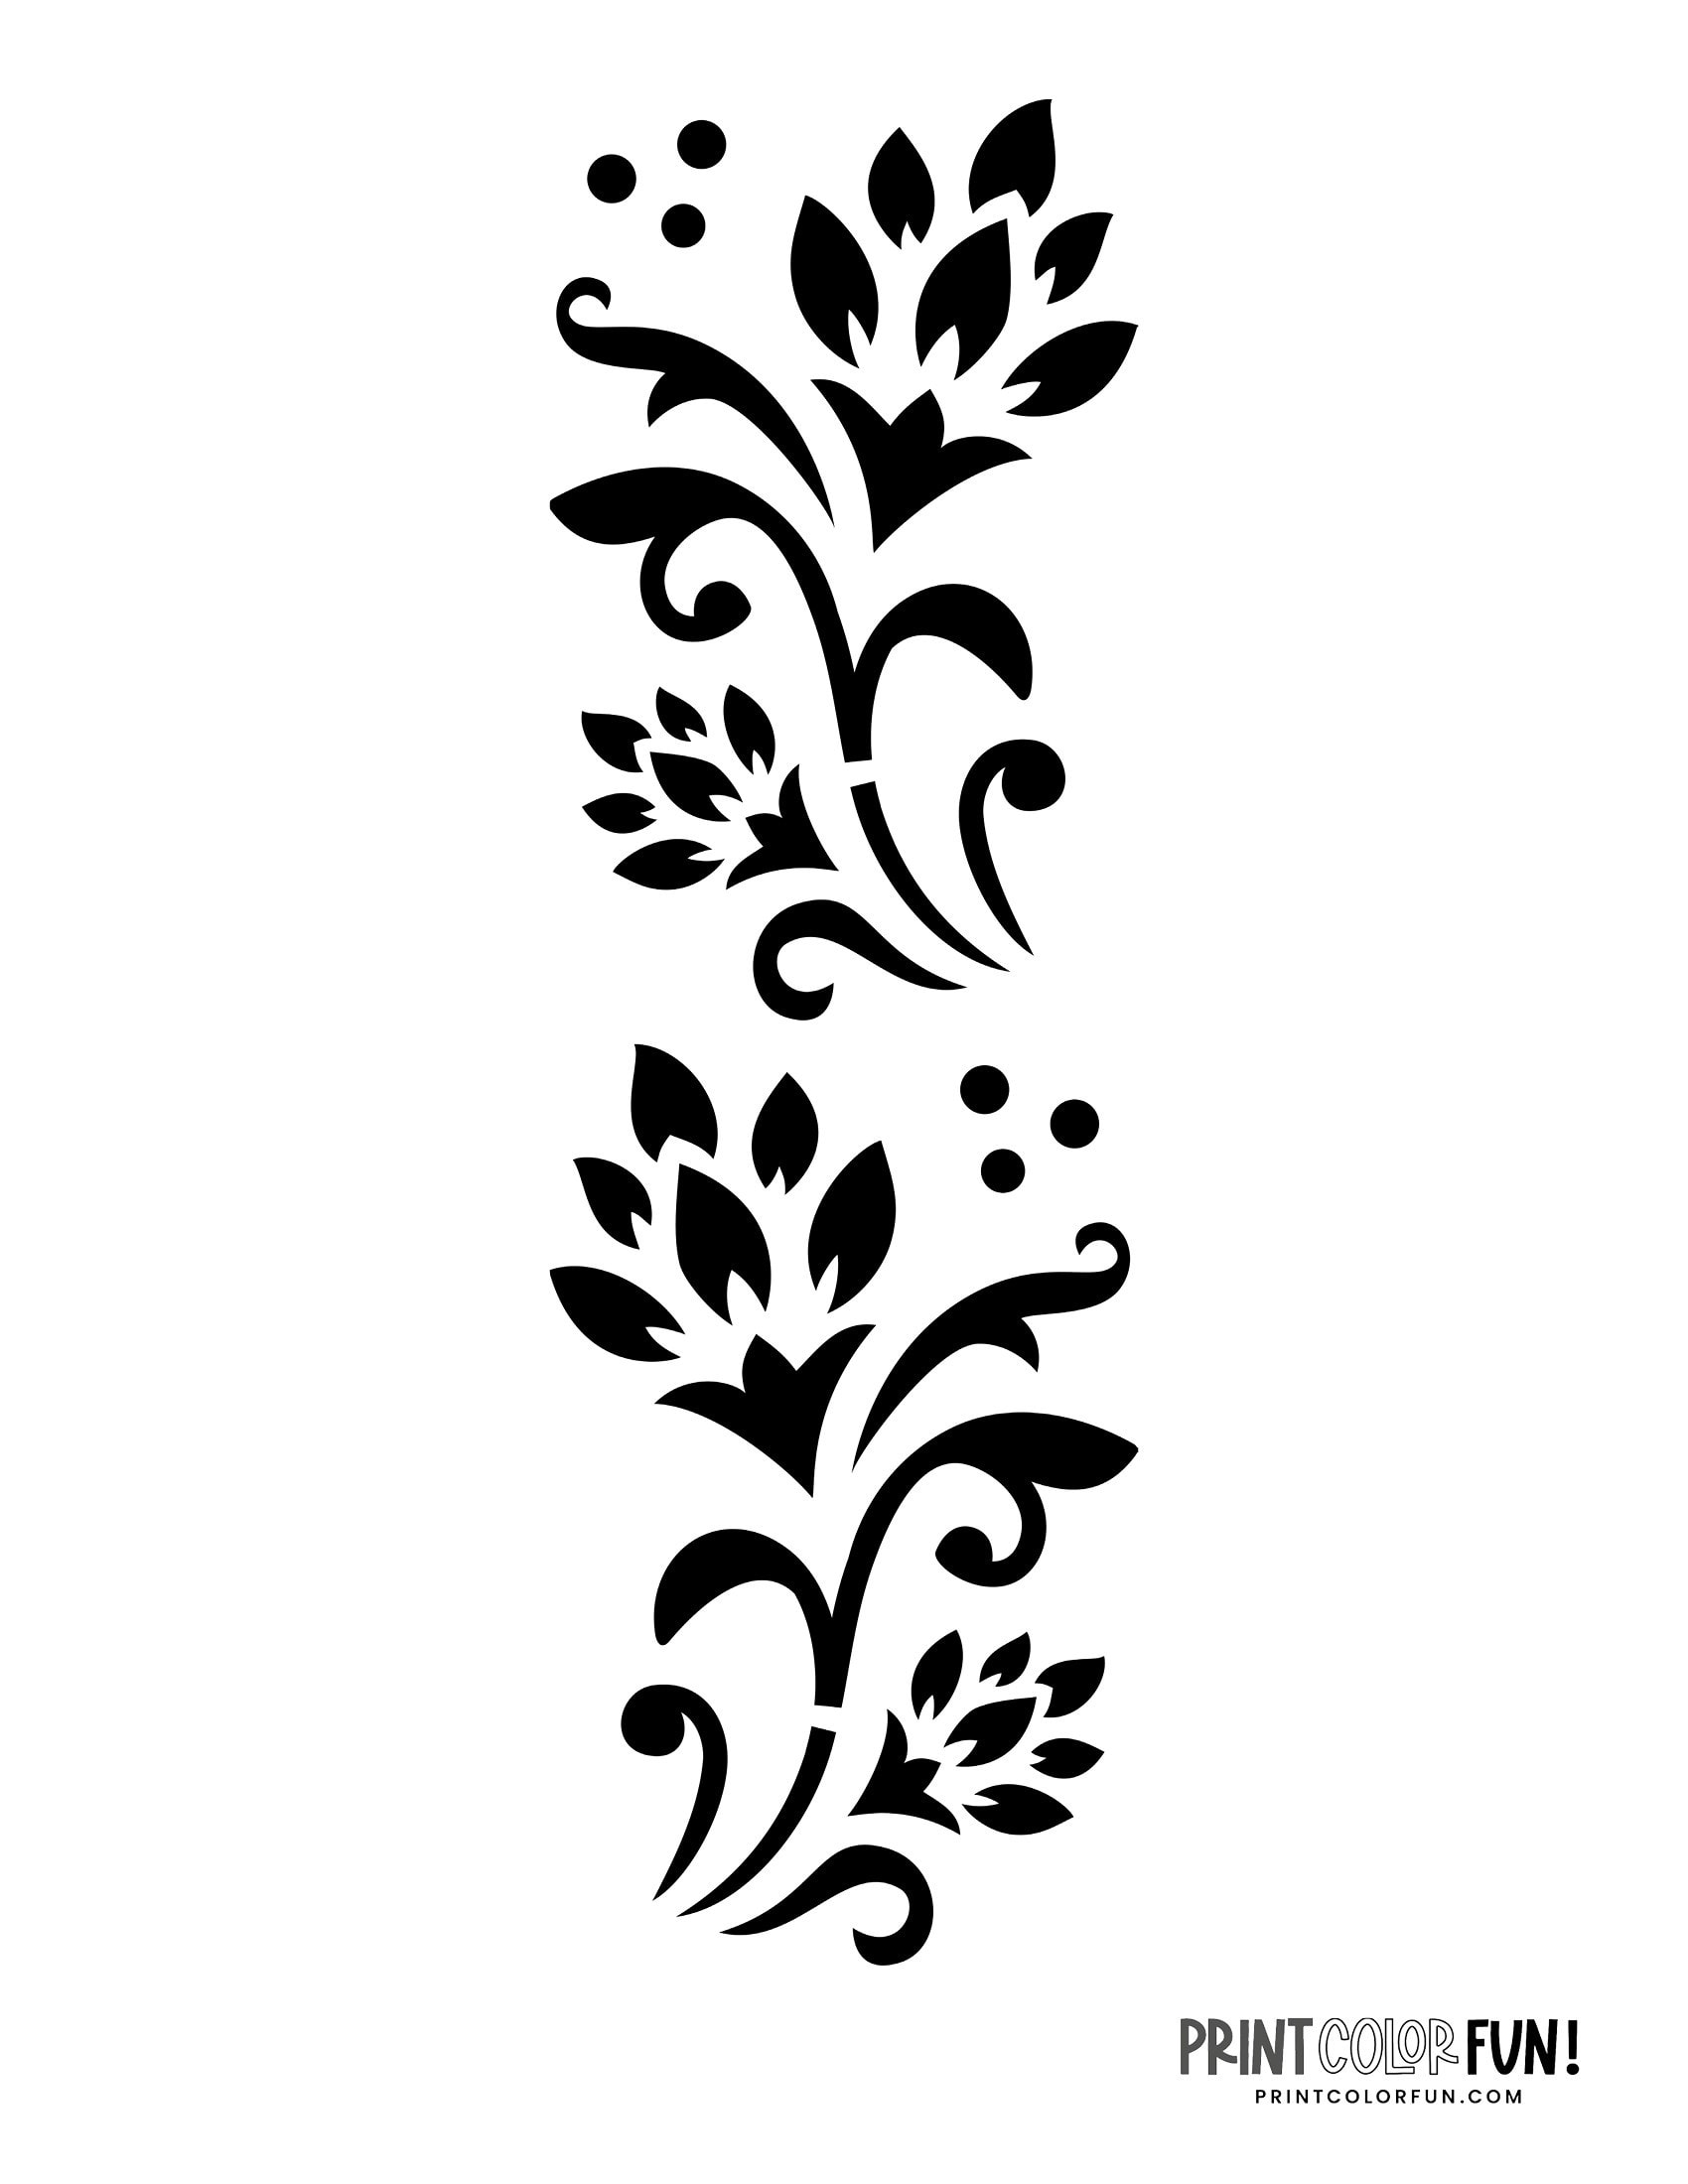 10 free flower stencil designs for printing craft projects at - free ...